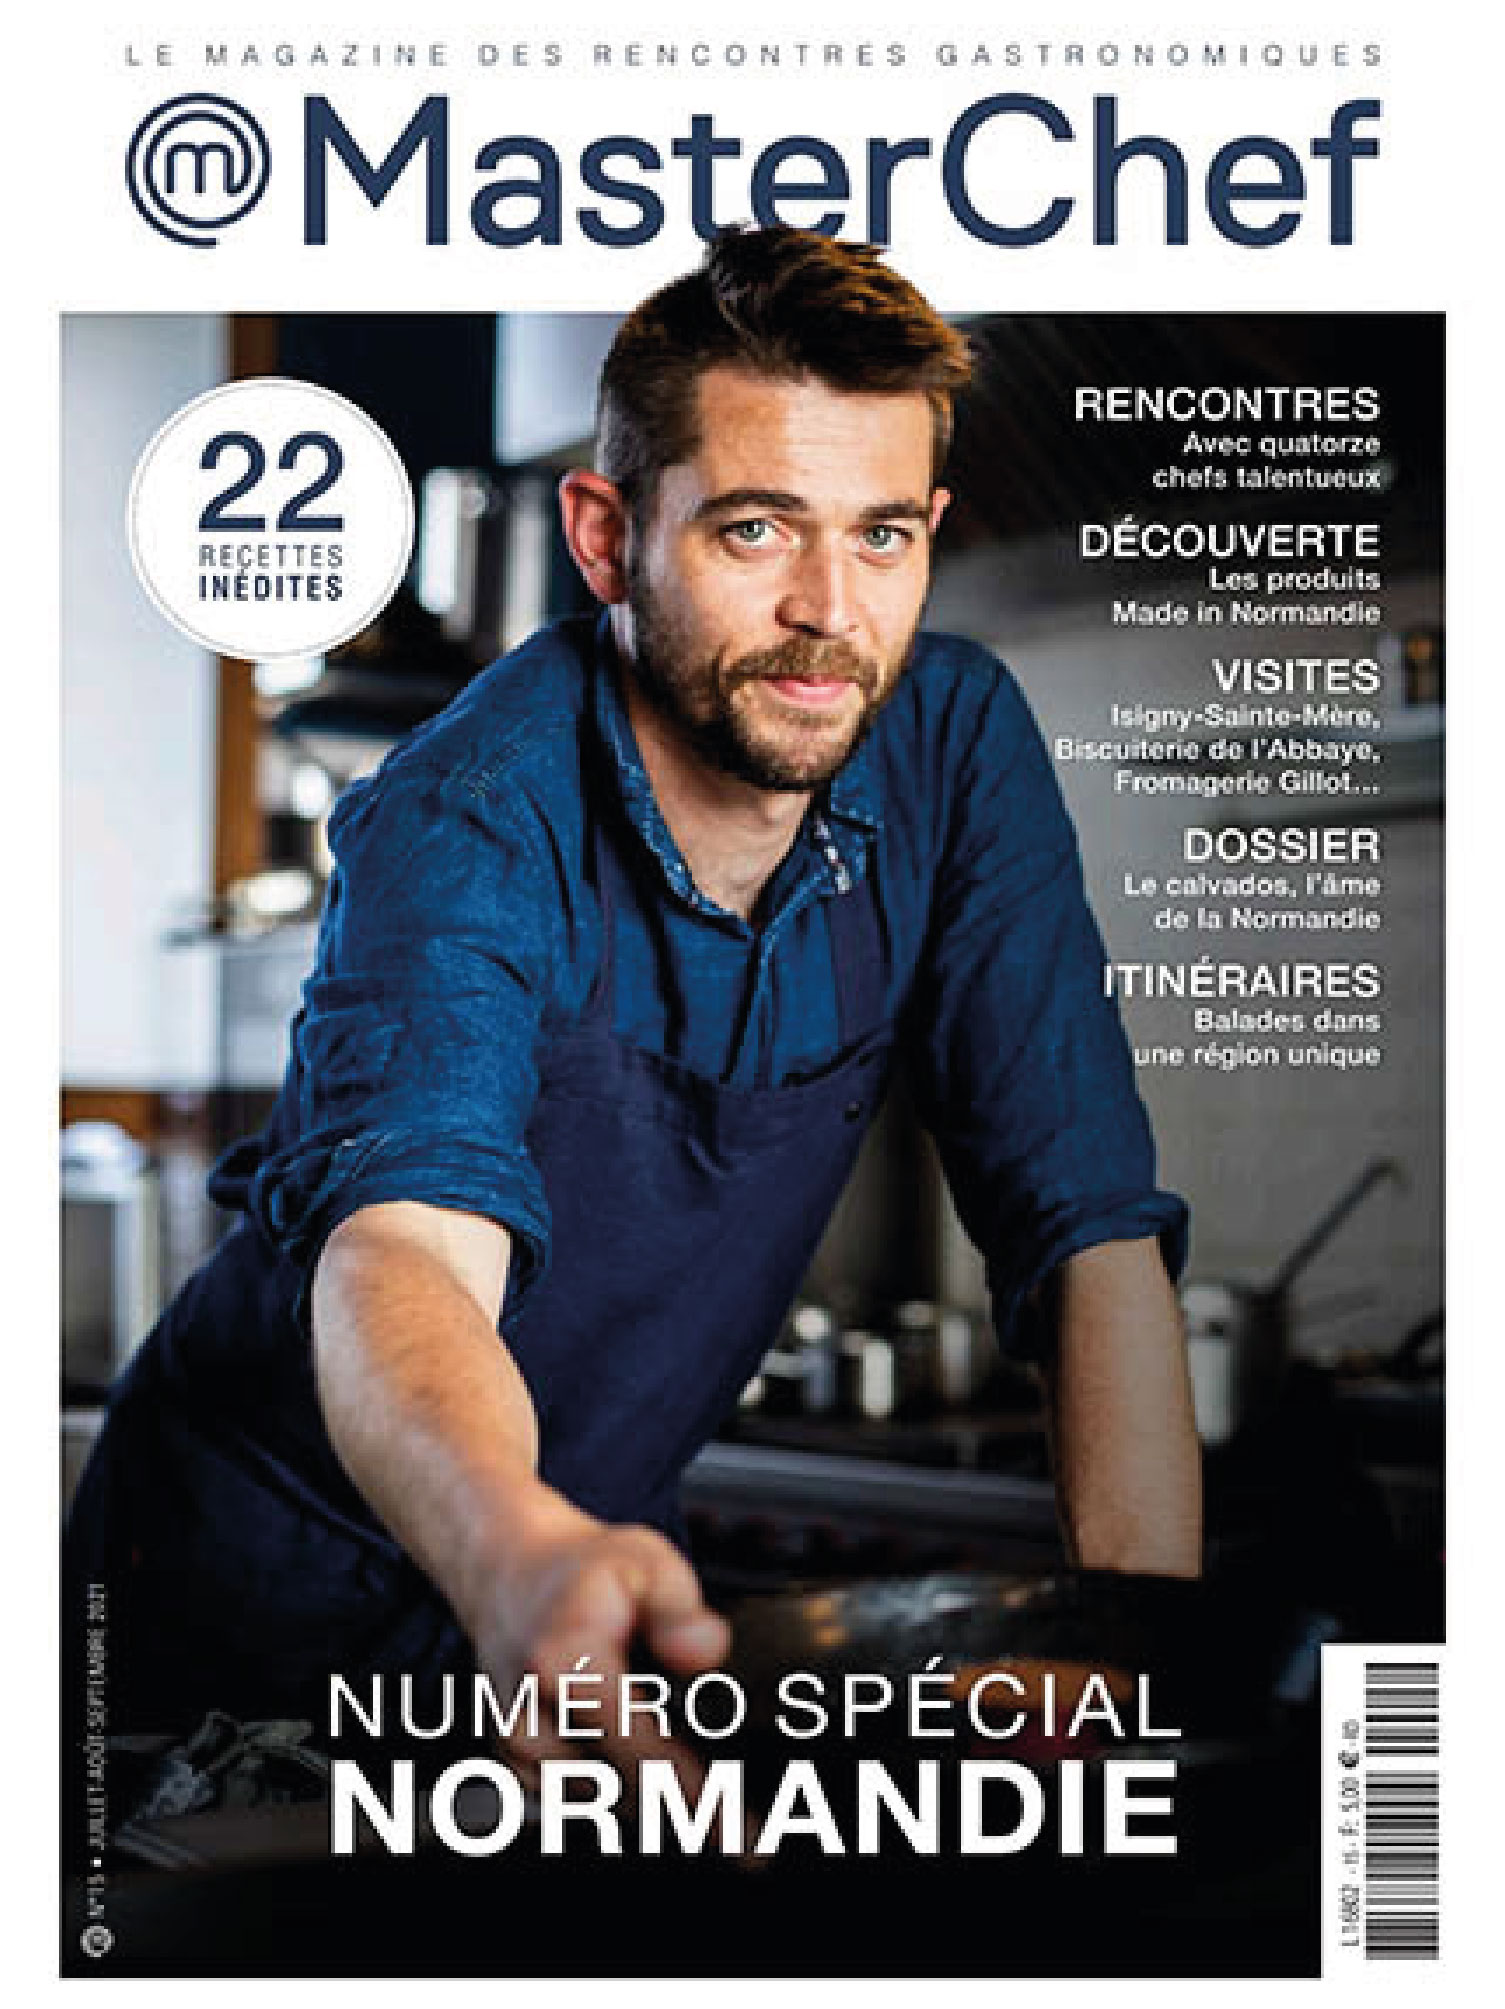 cover of masterchef magazine july 2021_on normandy